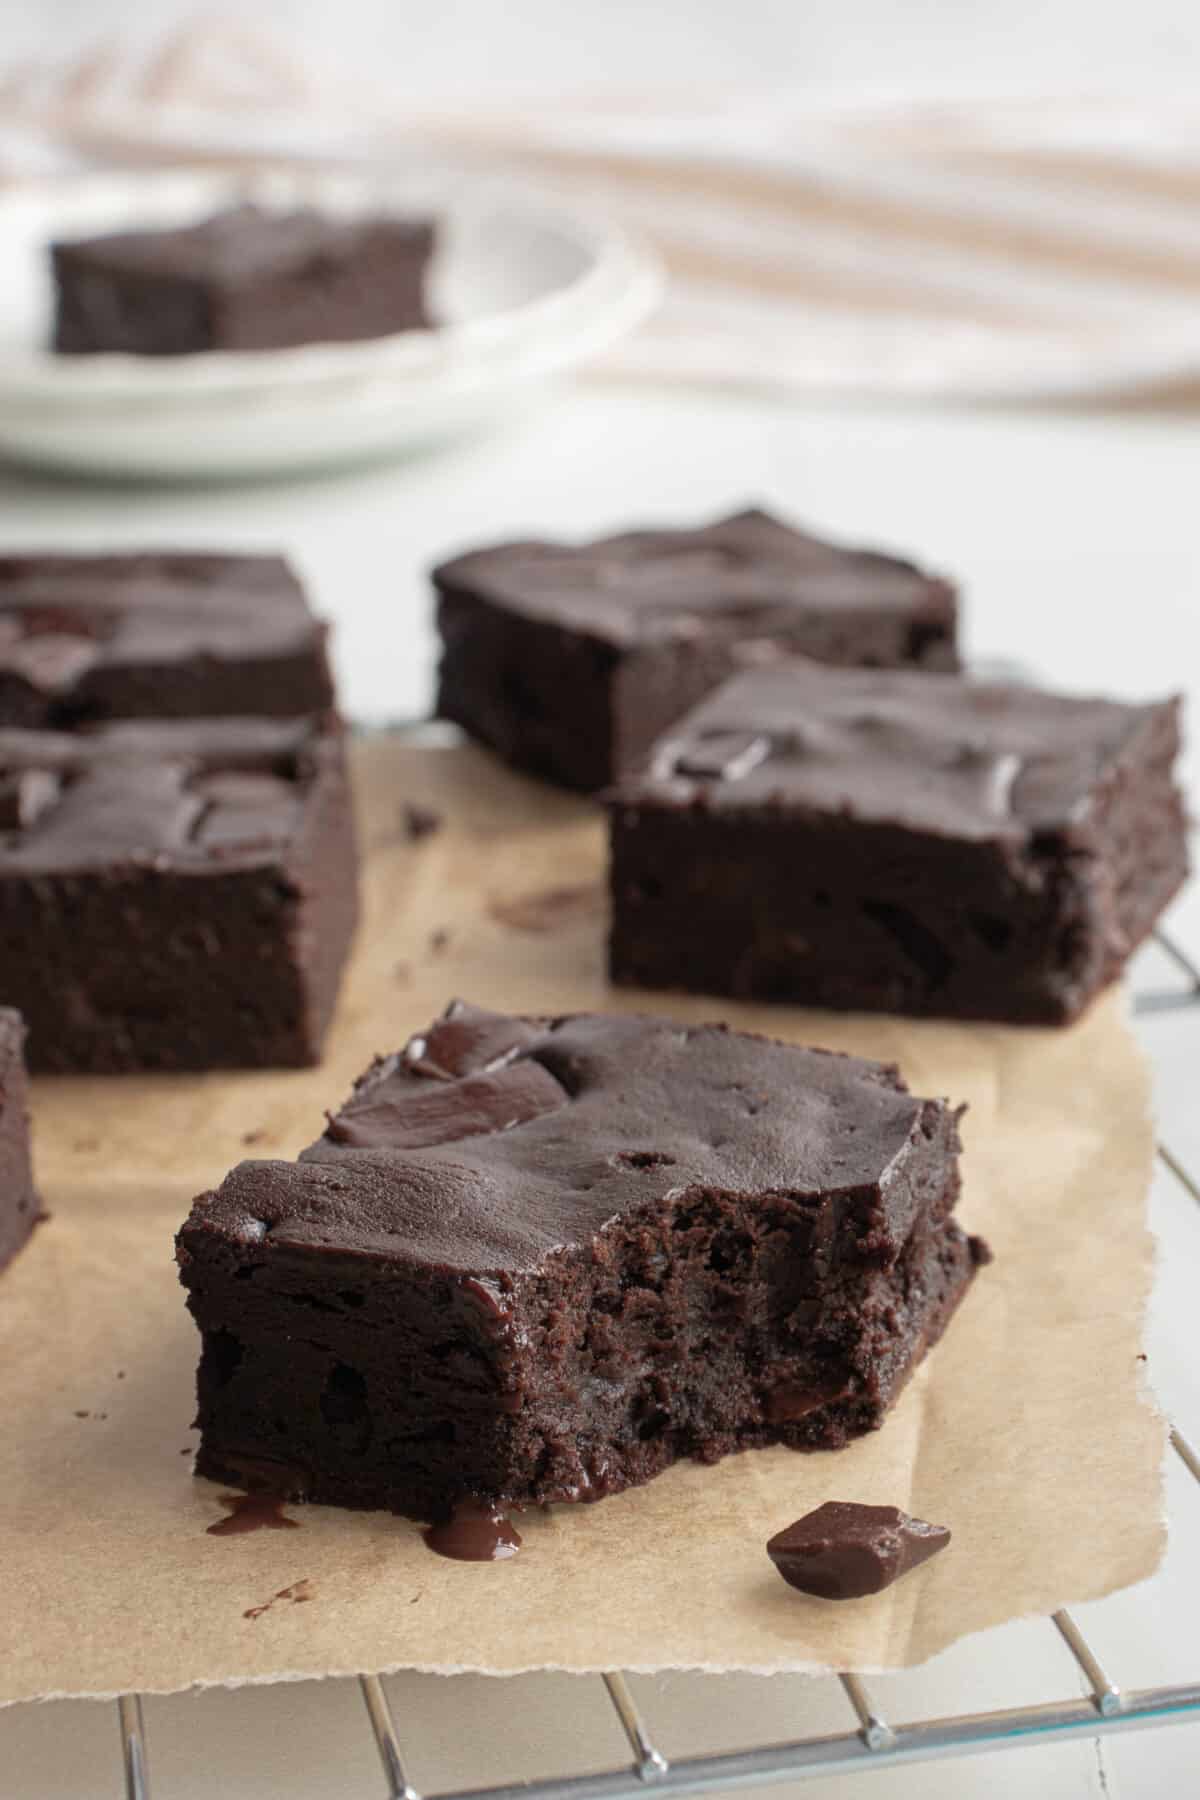 Greek yogurt brownies on parchment paper, one of which is missing a bite.